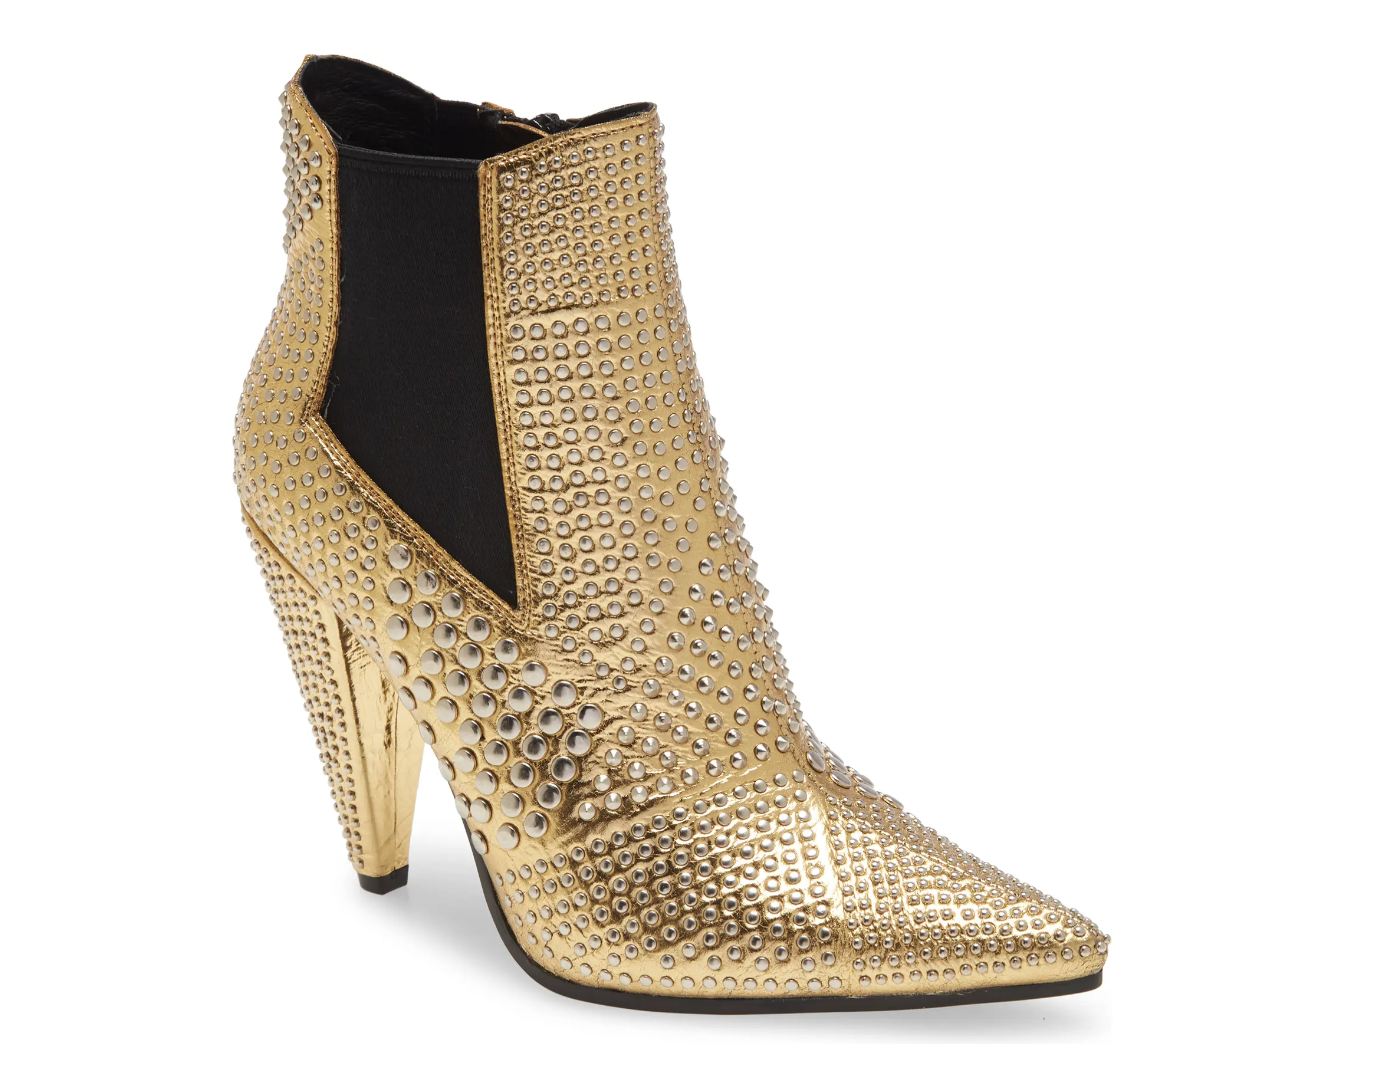 Silver-studded gold pointy boots